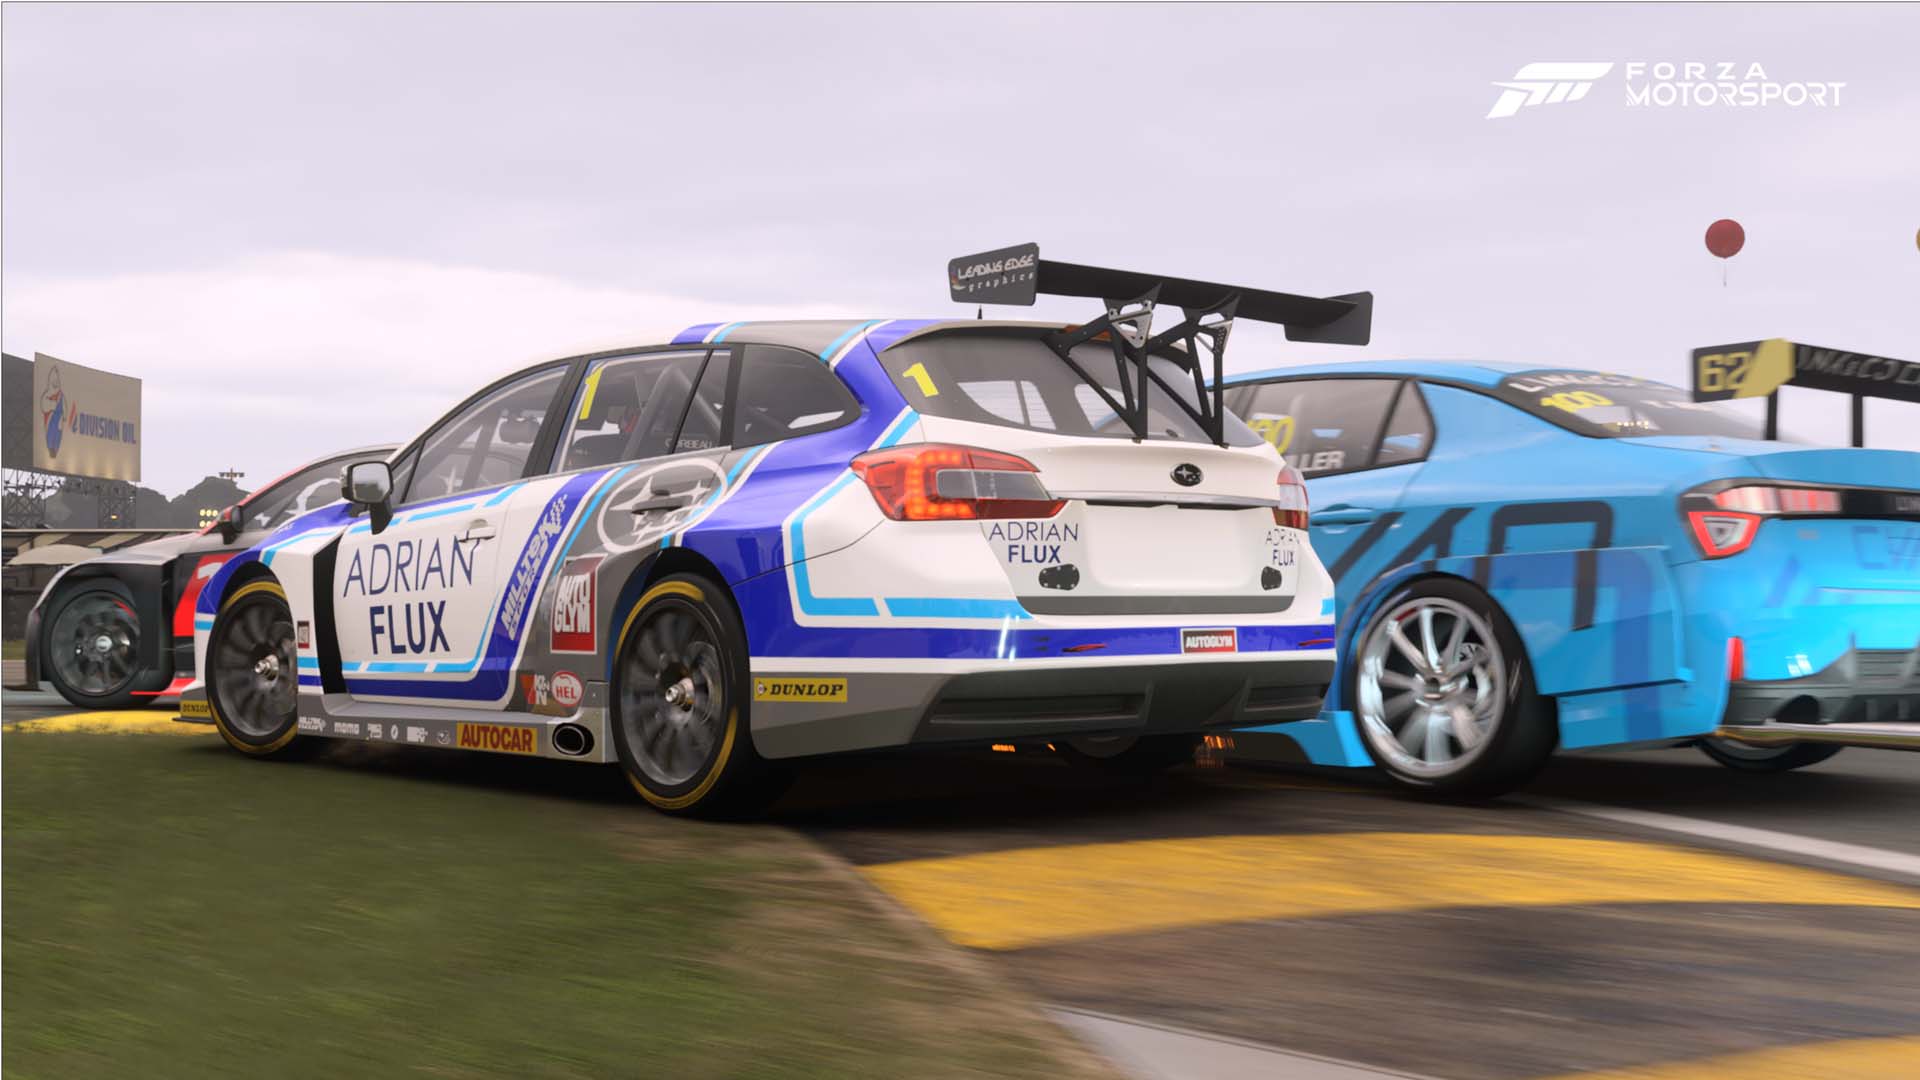 Forza Motorsport PC Specs – Forza Support